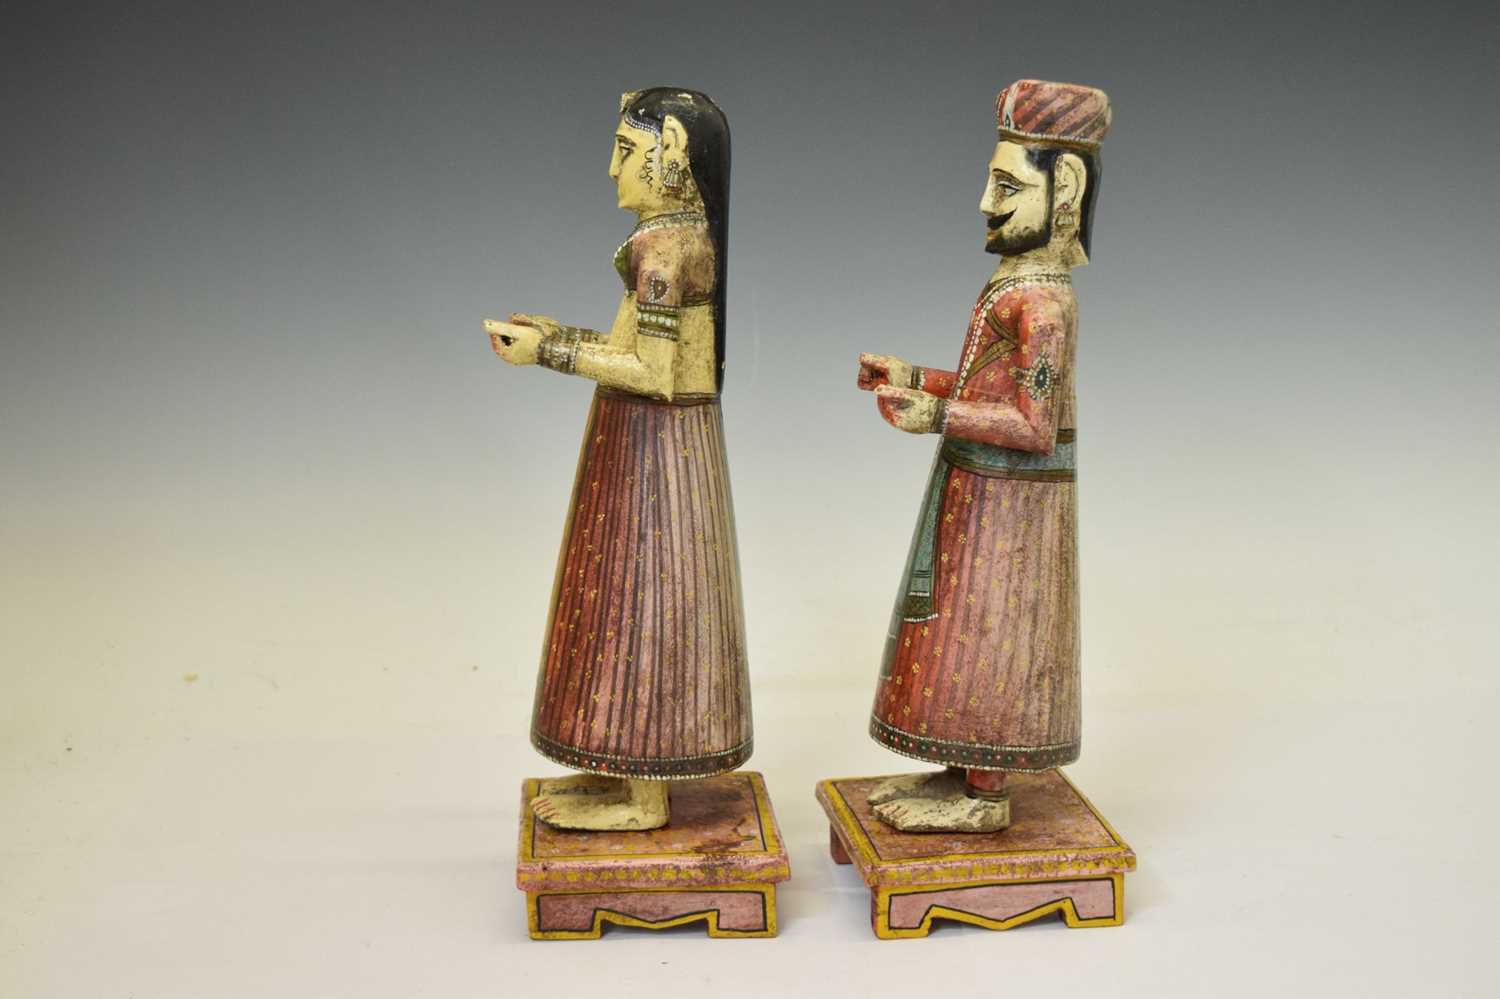 Pair of Indian painted wooden figures - Image 7 of 7